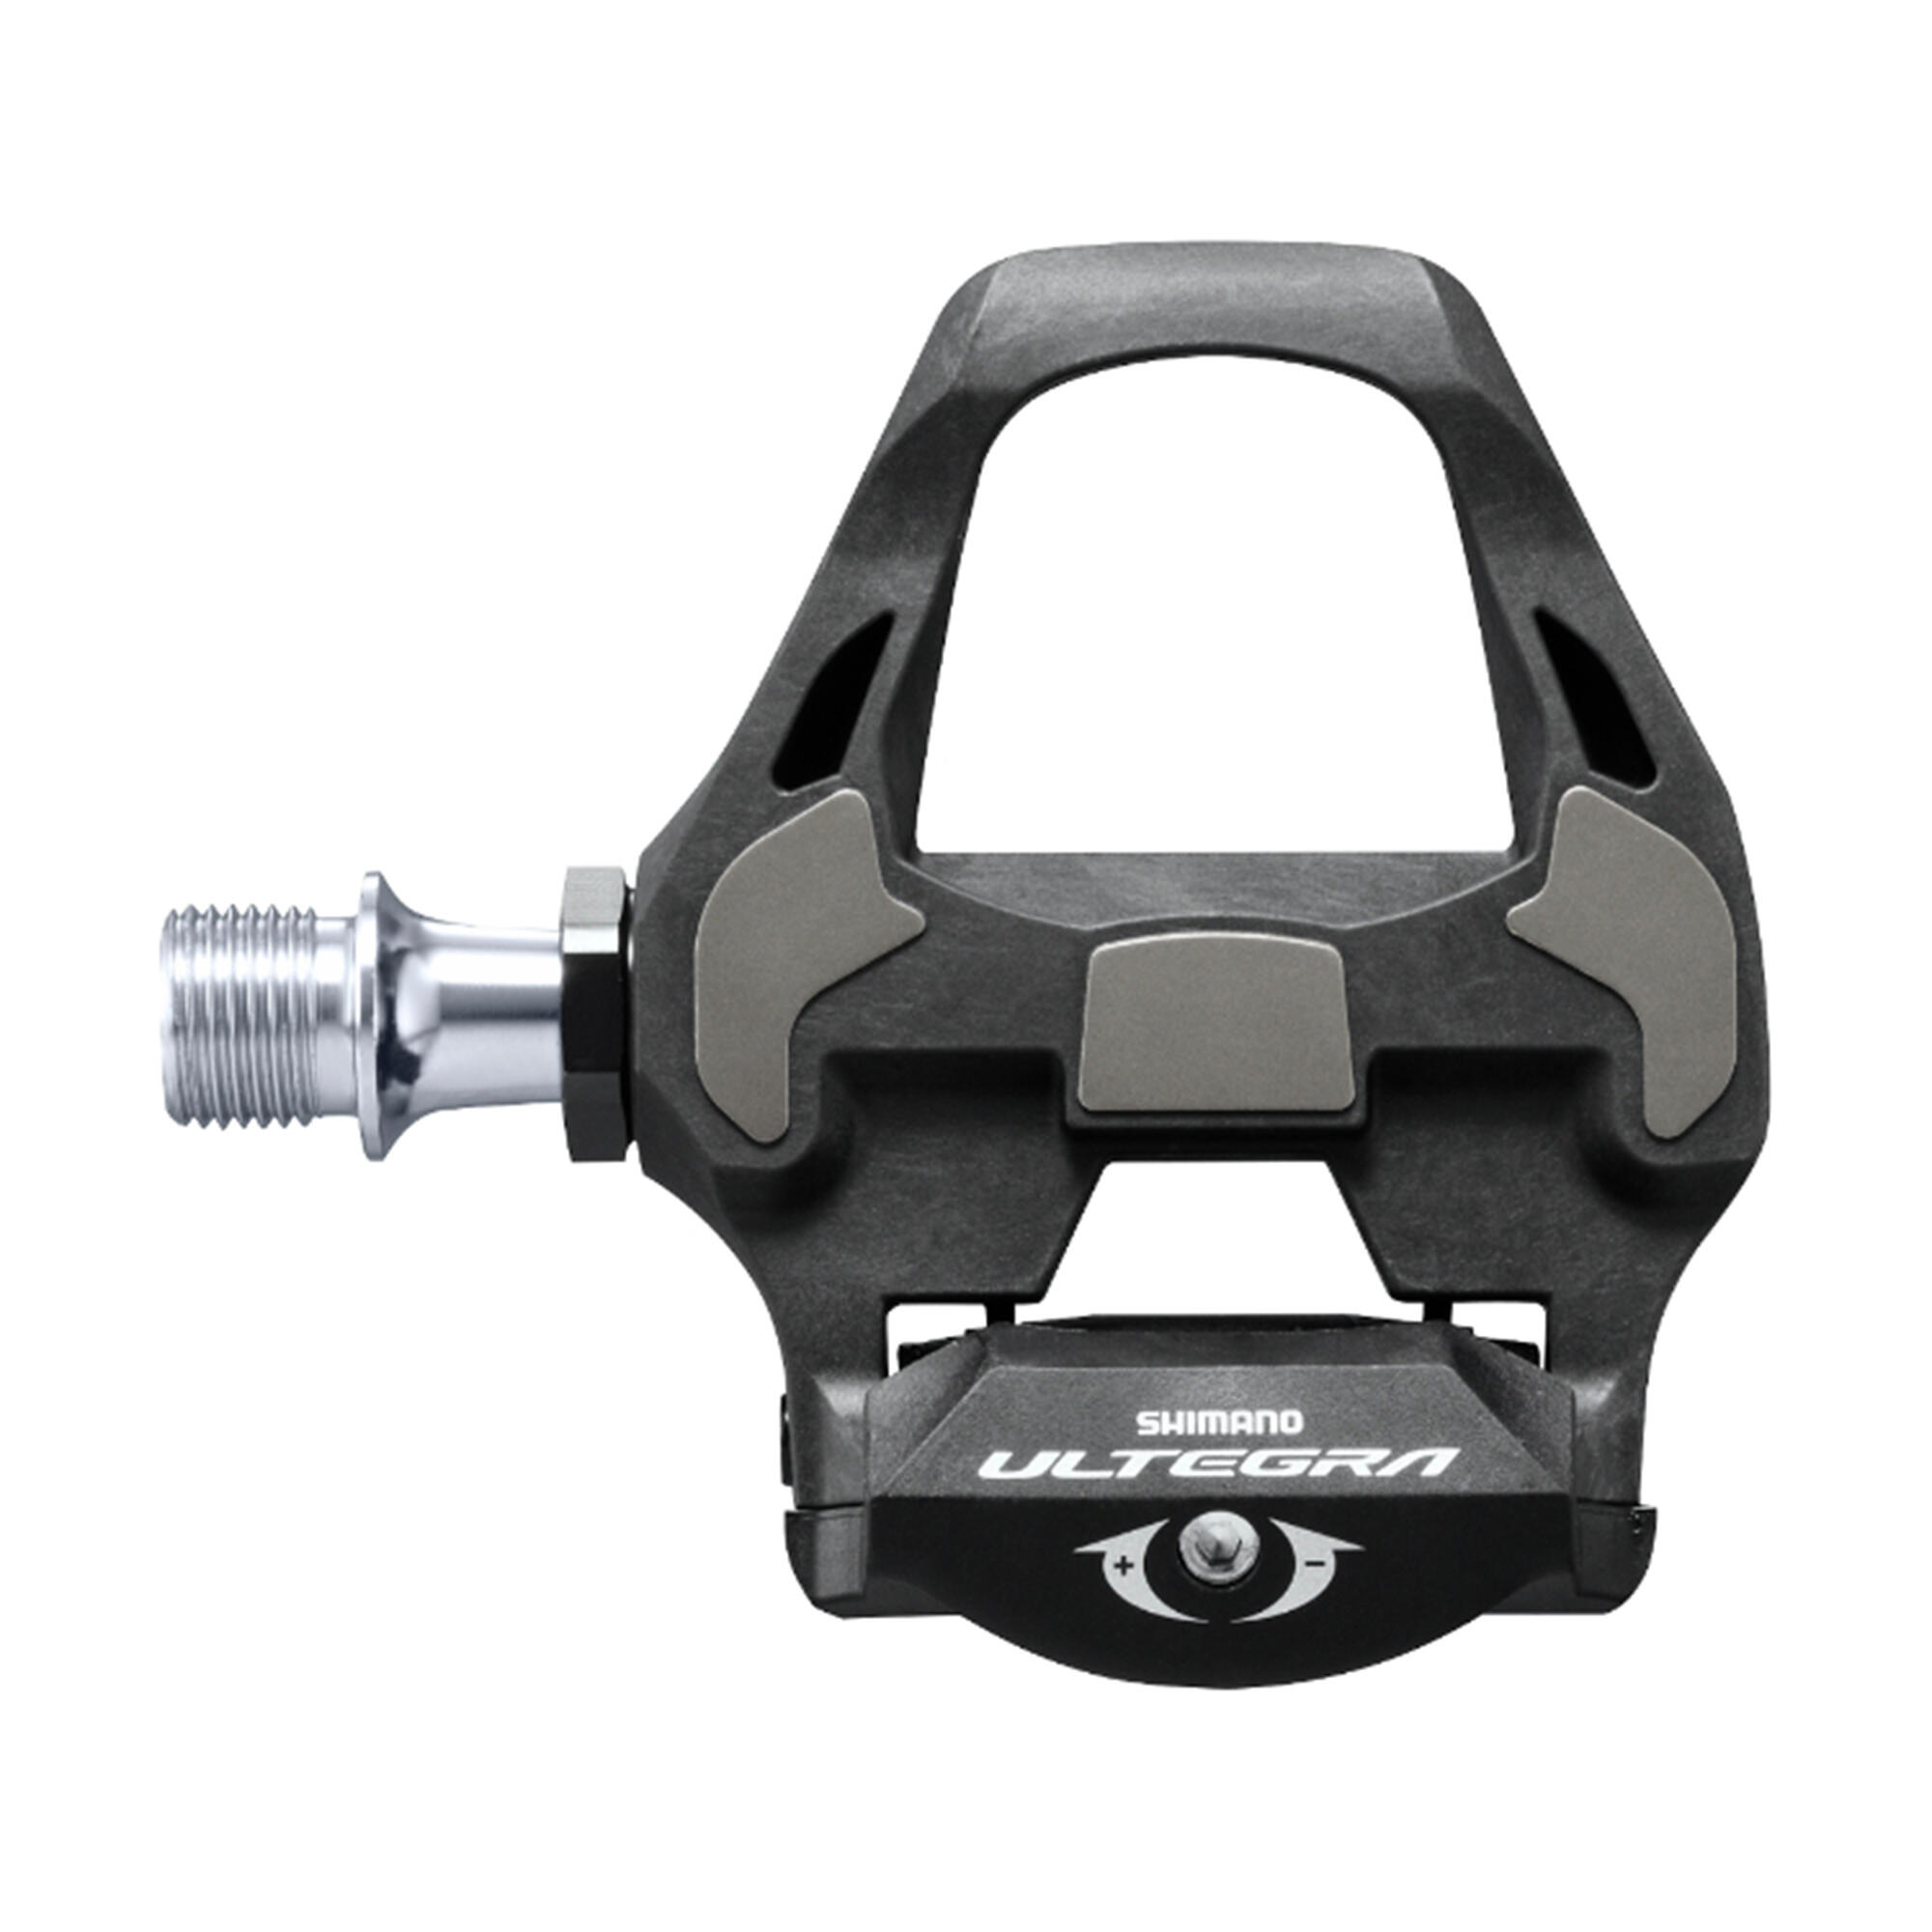 Shimano Pair Of Pedals Ultegra Pd-r8000 + Cleats